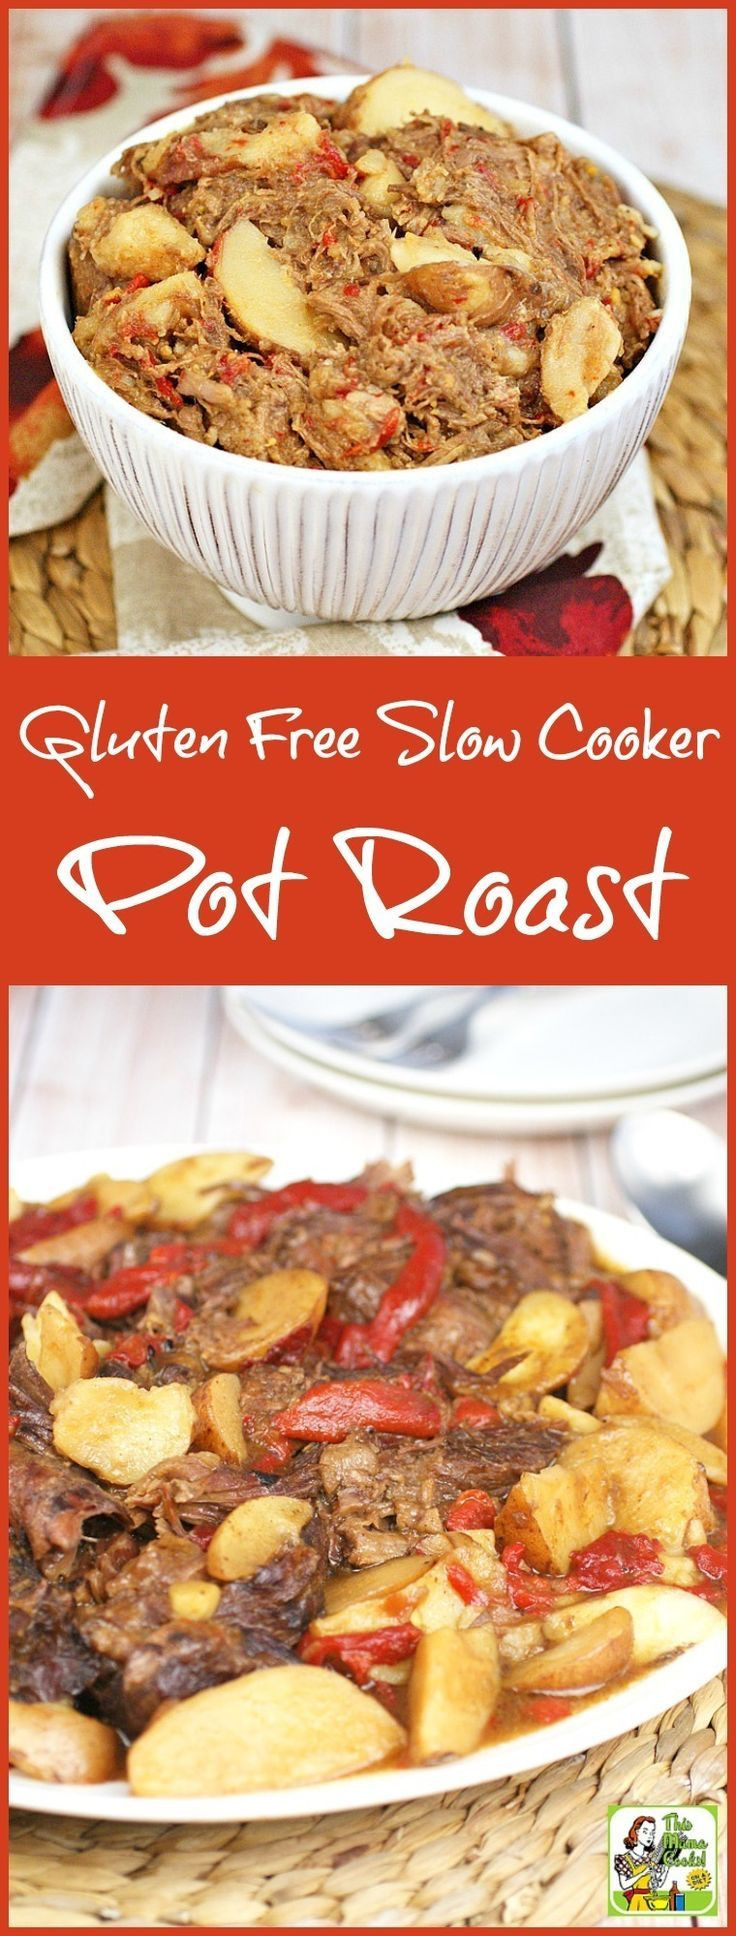 Gluten And Dairy Free Crockpot Recipes
 Love Mississippi Pot Roast but need a slow cooker recipe